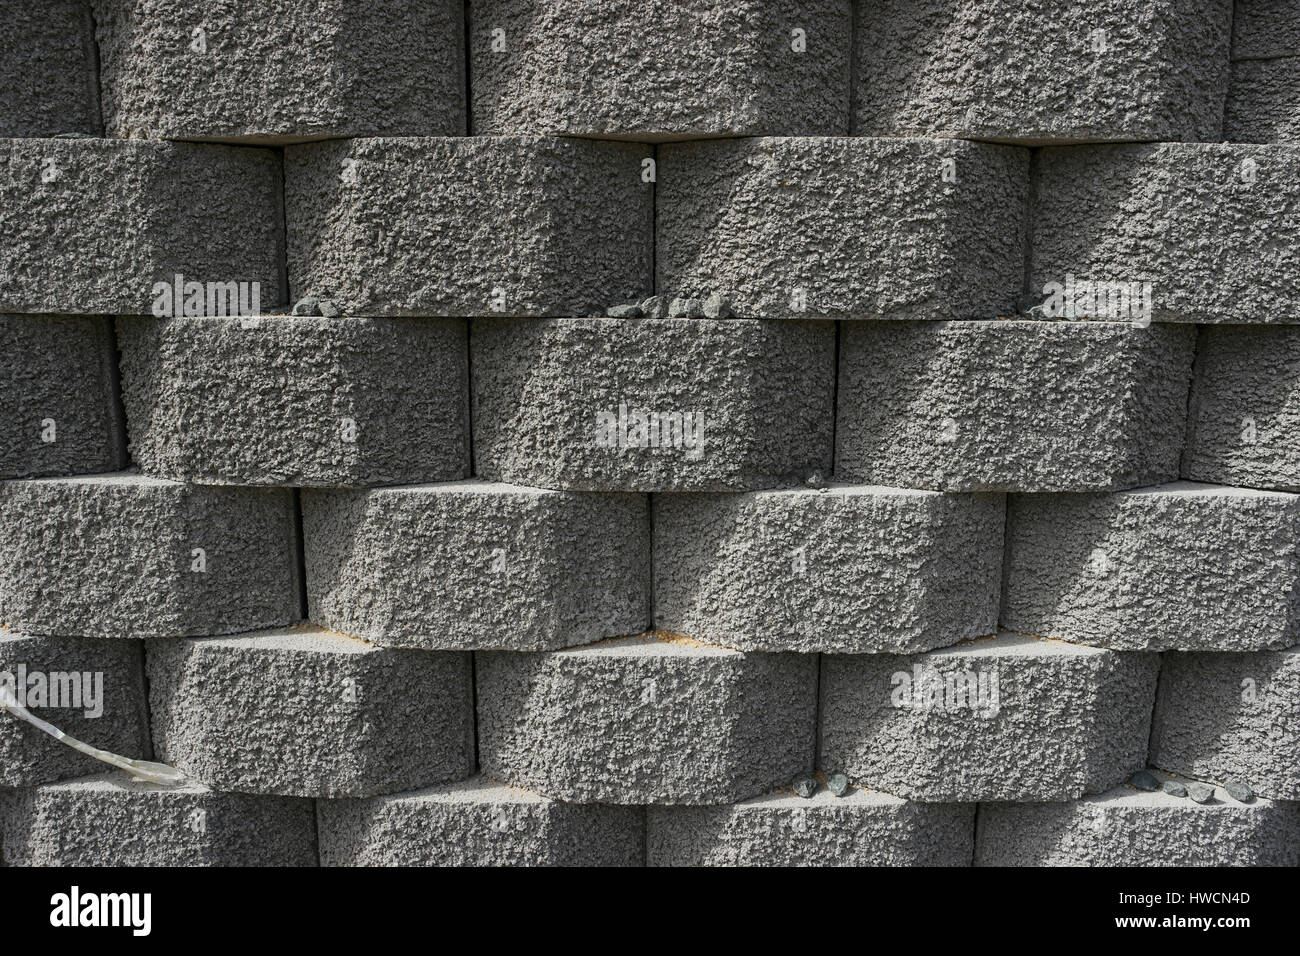 Cement blocks stacked for construction Stock Photo - Alamy